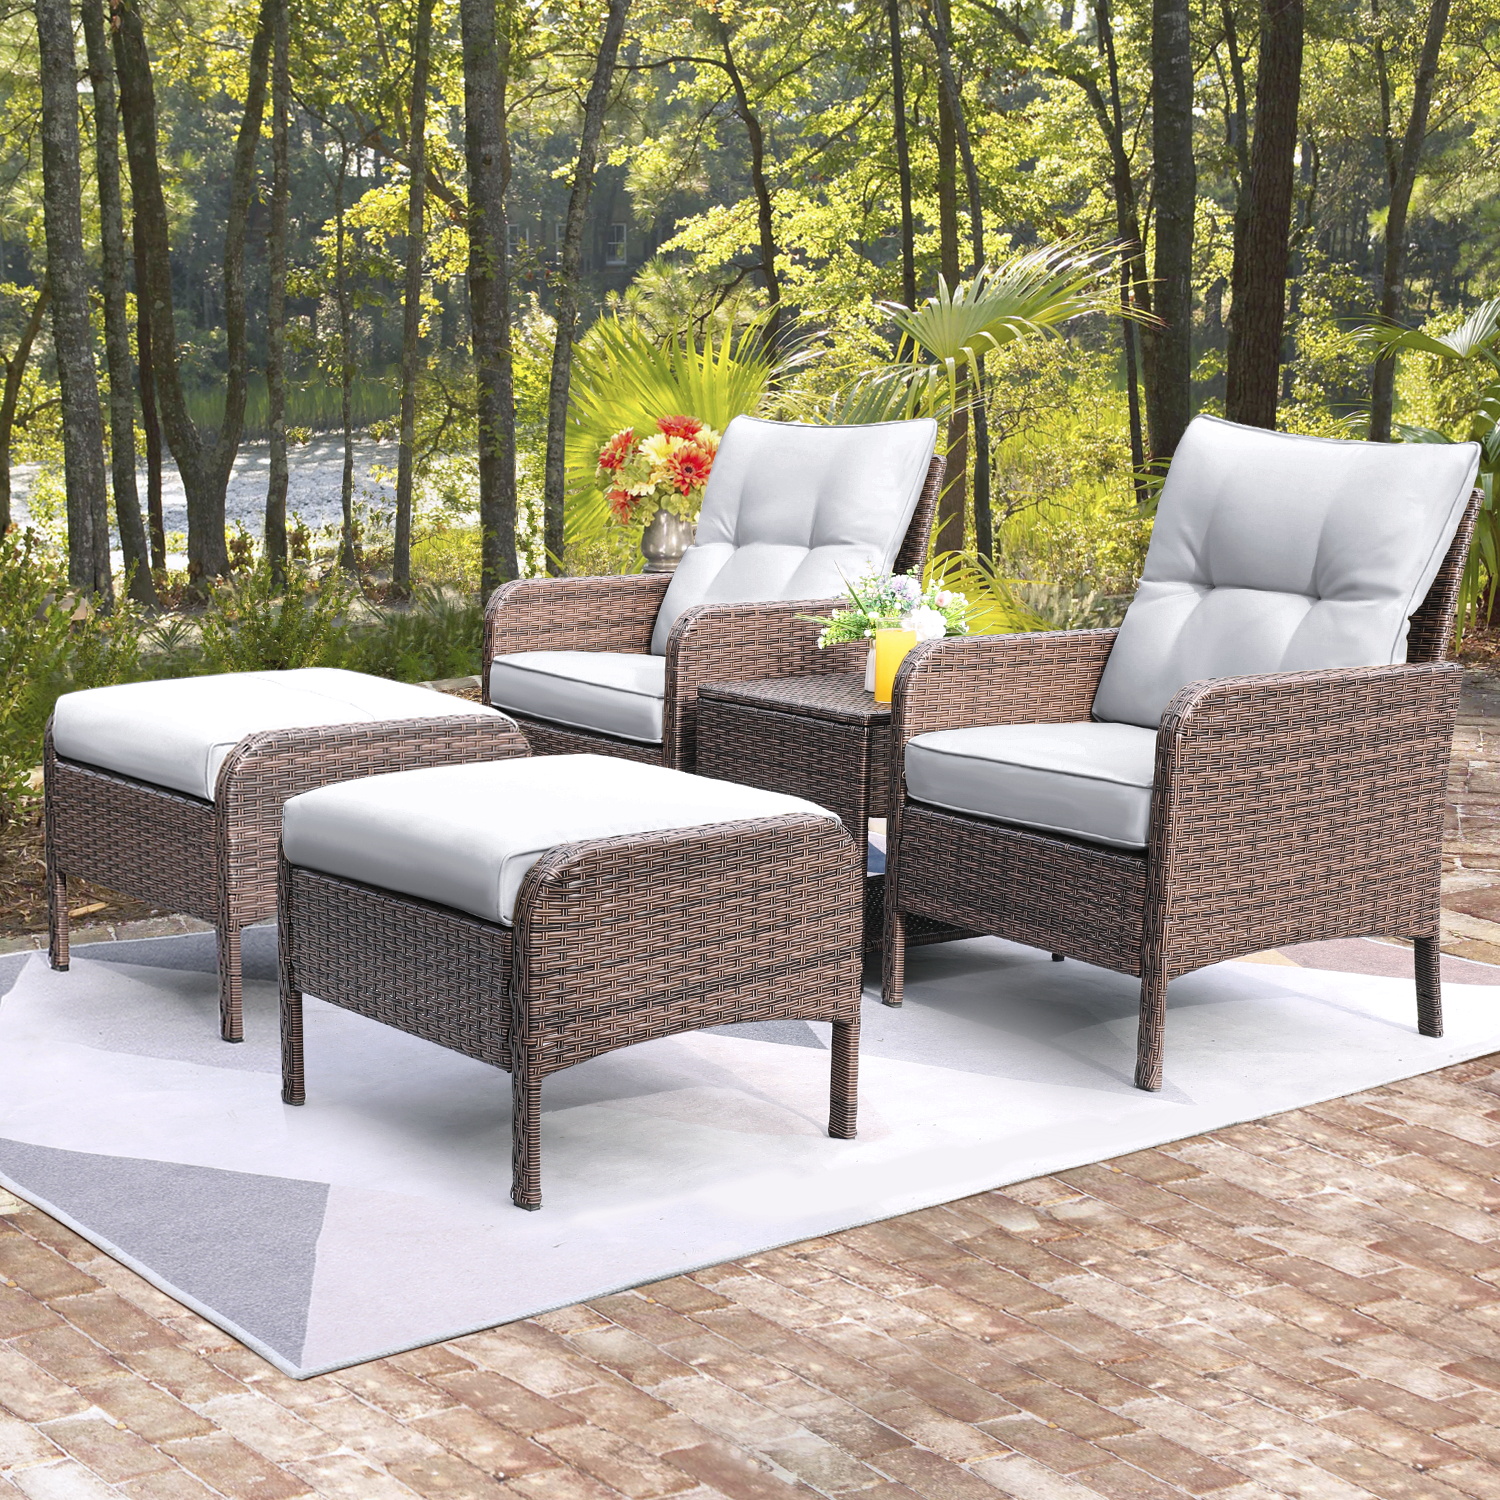 LACOO 5 Pieces Wicker Patio Furniture Set Outdoor Patio Seat Conversation Cushion Chairs with Table & Ottomans, Gray - image 4 of 8